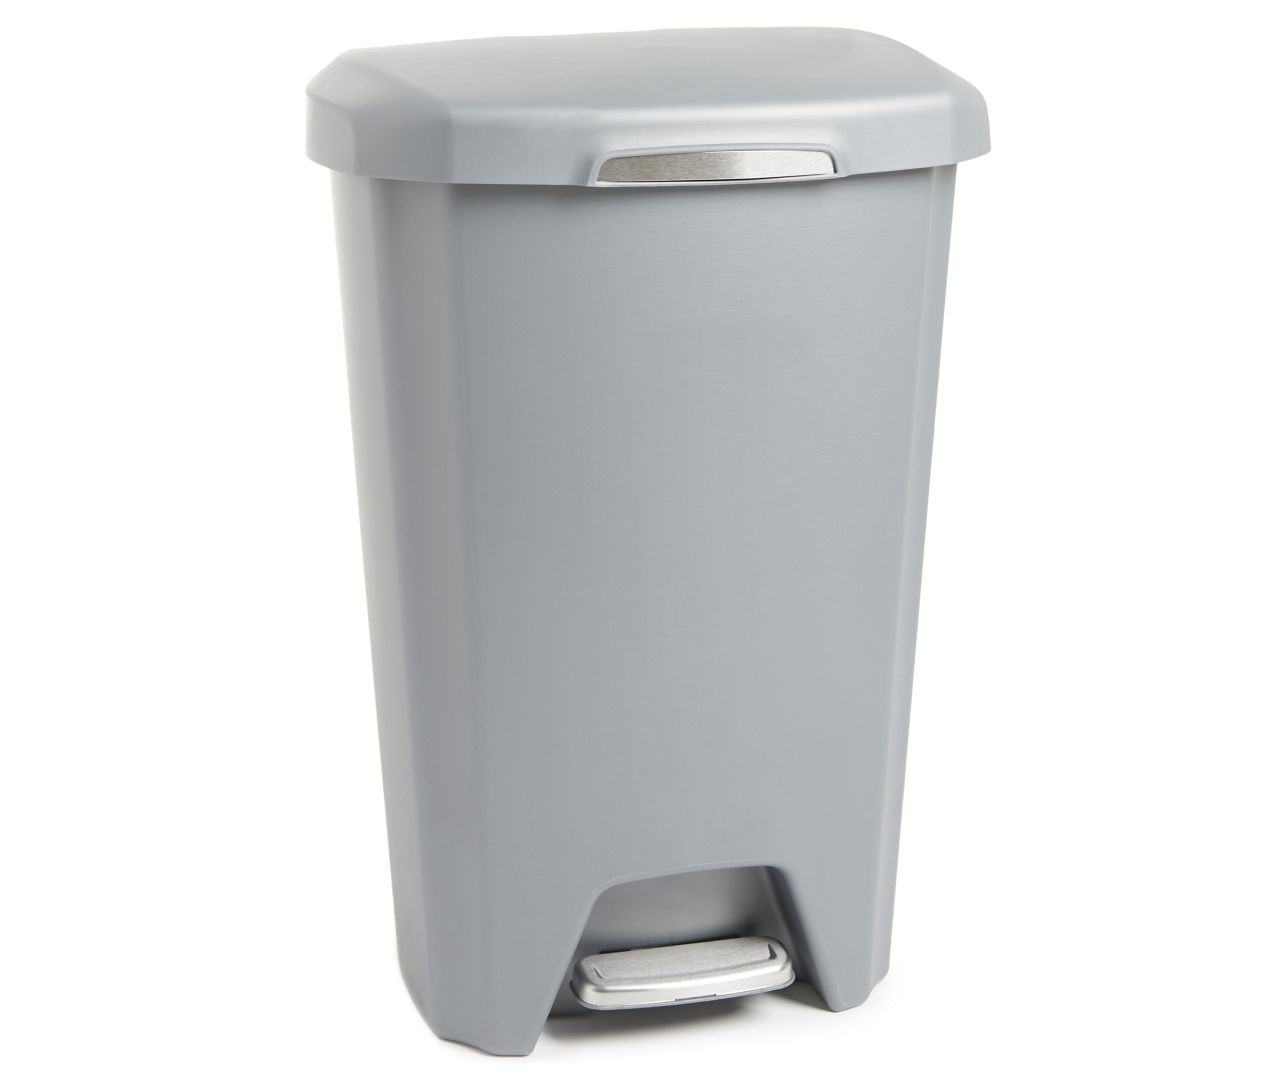 Rubbermaid 13-Gallons Gunmetal Blue Plastic Kitchen Trash Can with Lid at